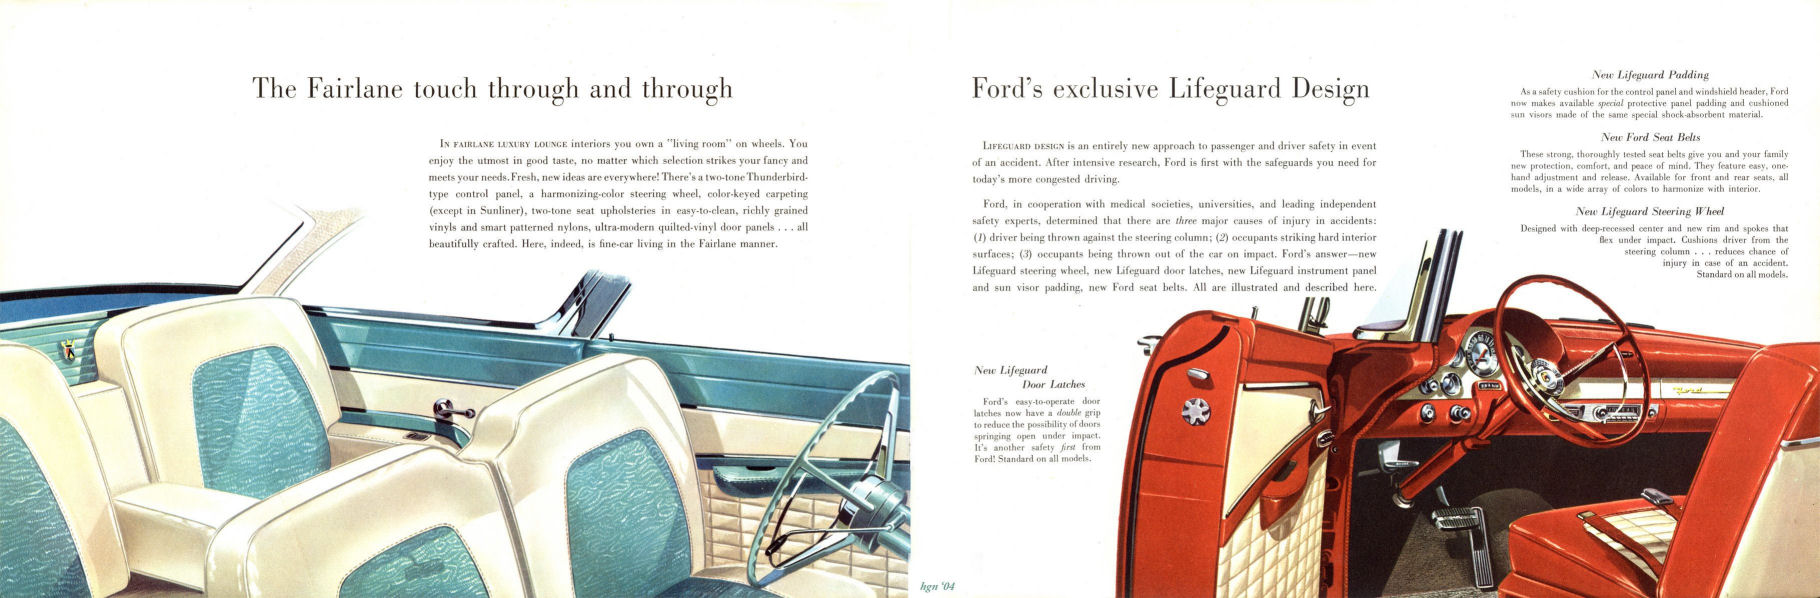 1956 Ford Fairlane Brochure Page 1